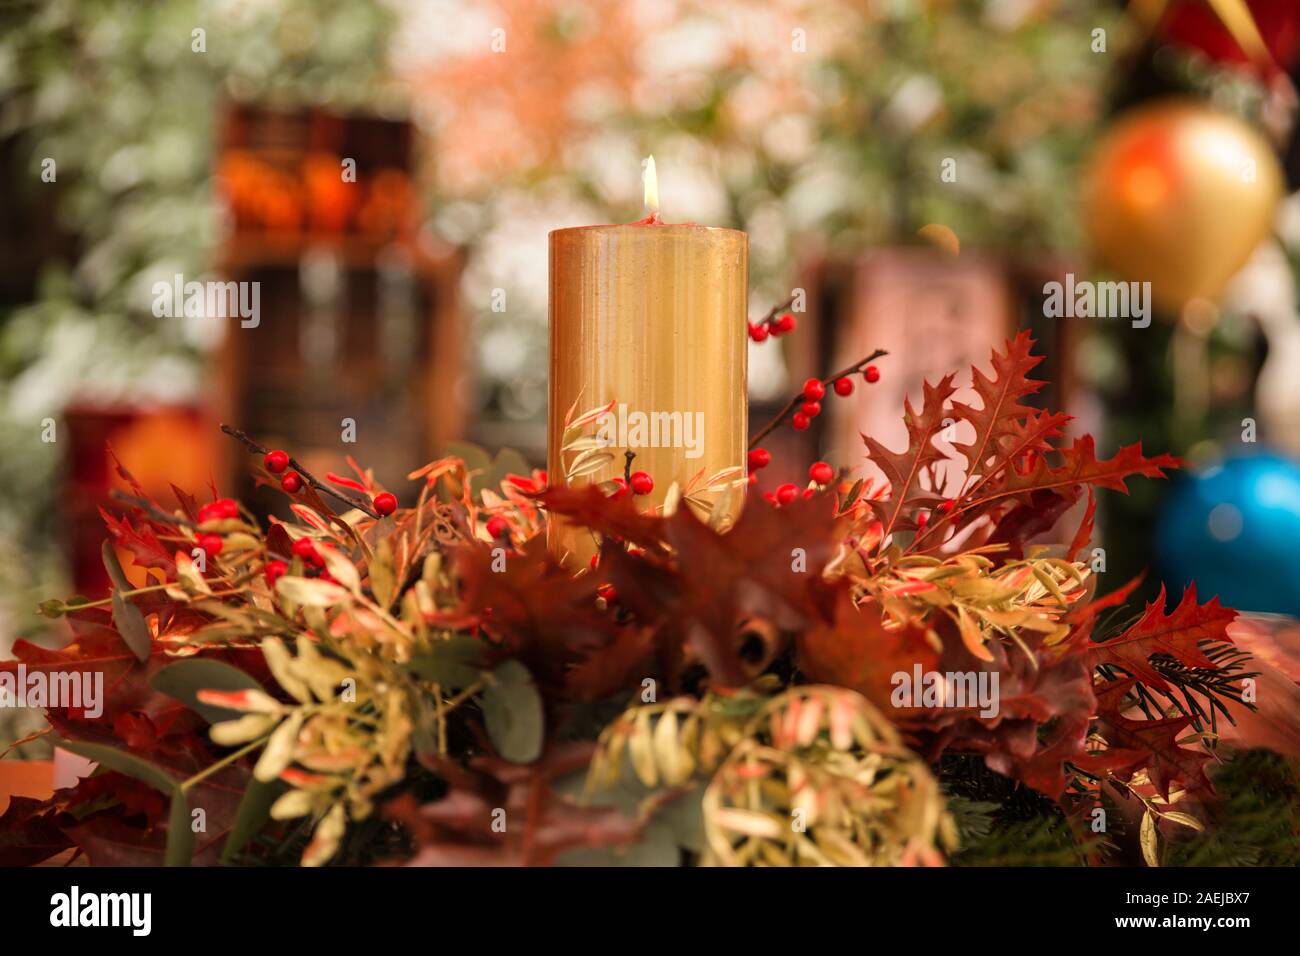 warm background with a lighted candle and christmas decorations Stock Photo